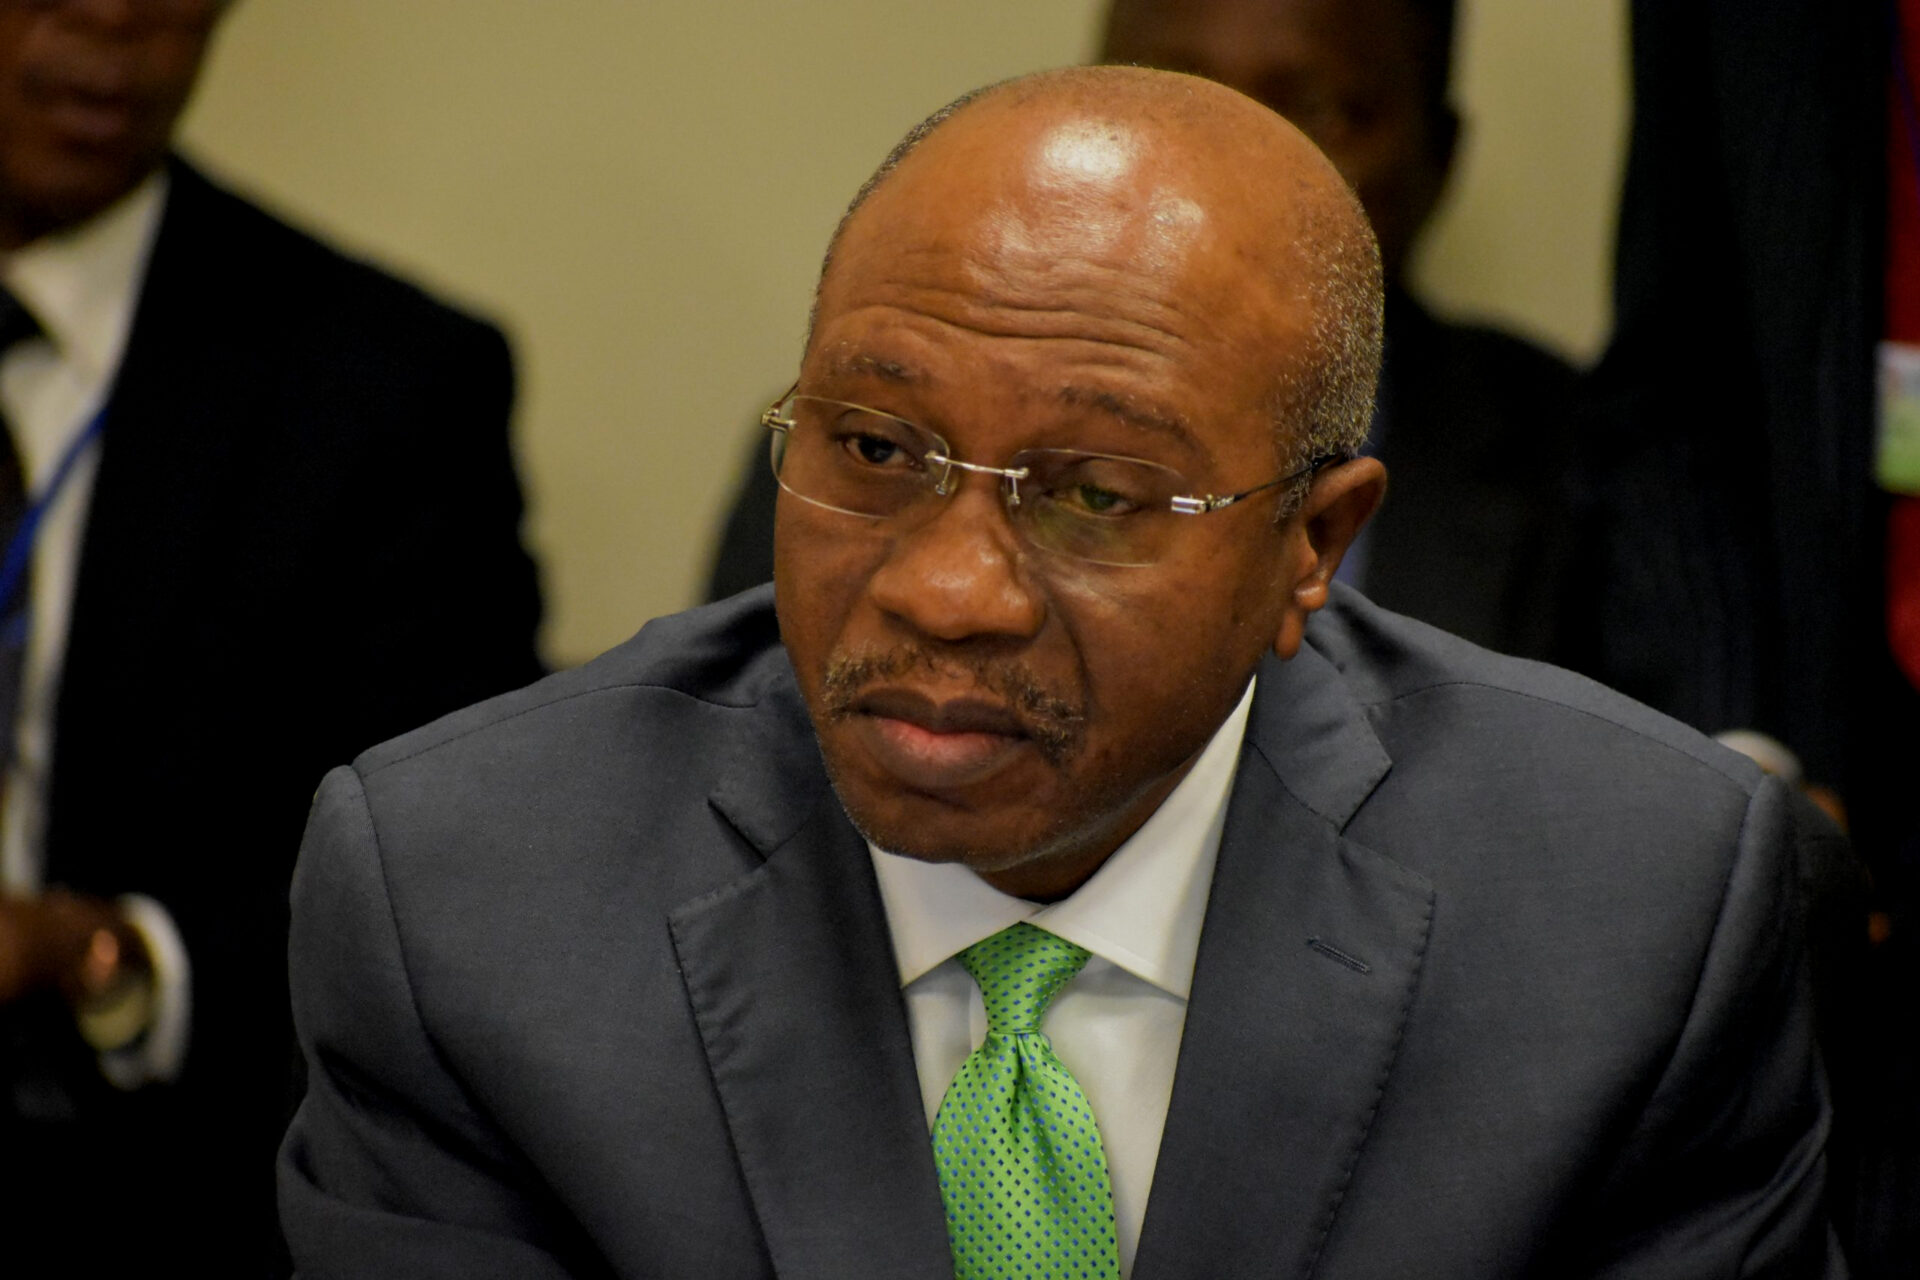 [GIST] 2023 Presidency: Groups Start Petition, Invite Signatories To Demand Immediate Resignation Of Emefiele As Nigerian Central Bank Governor